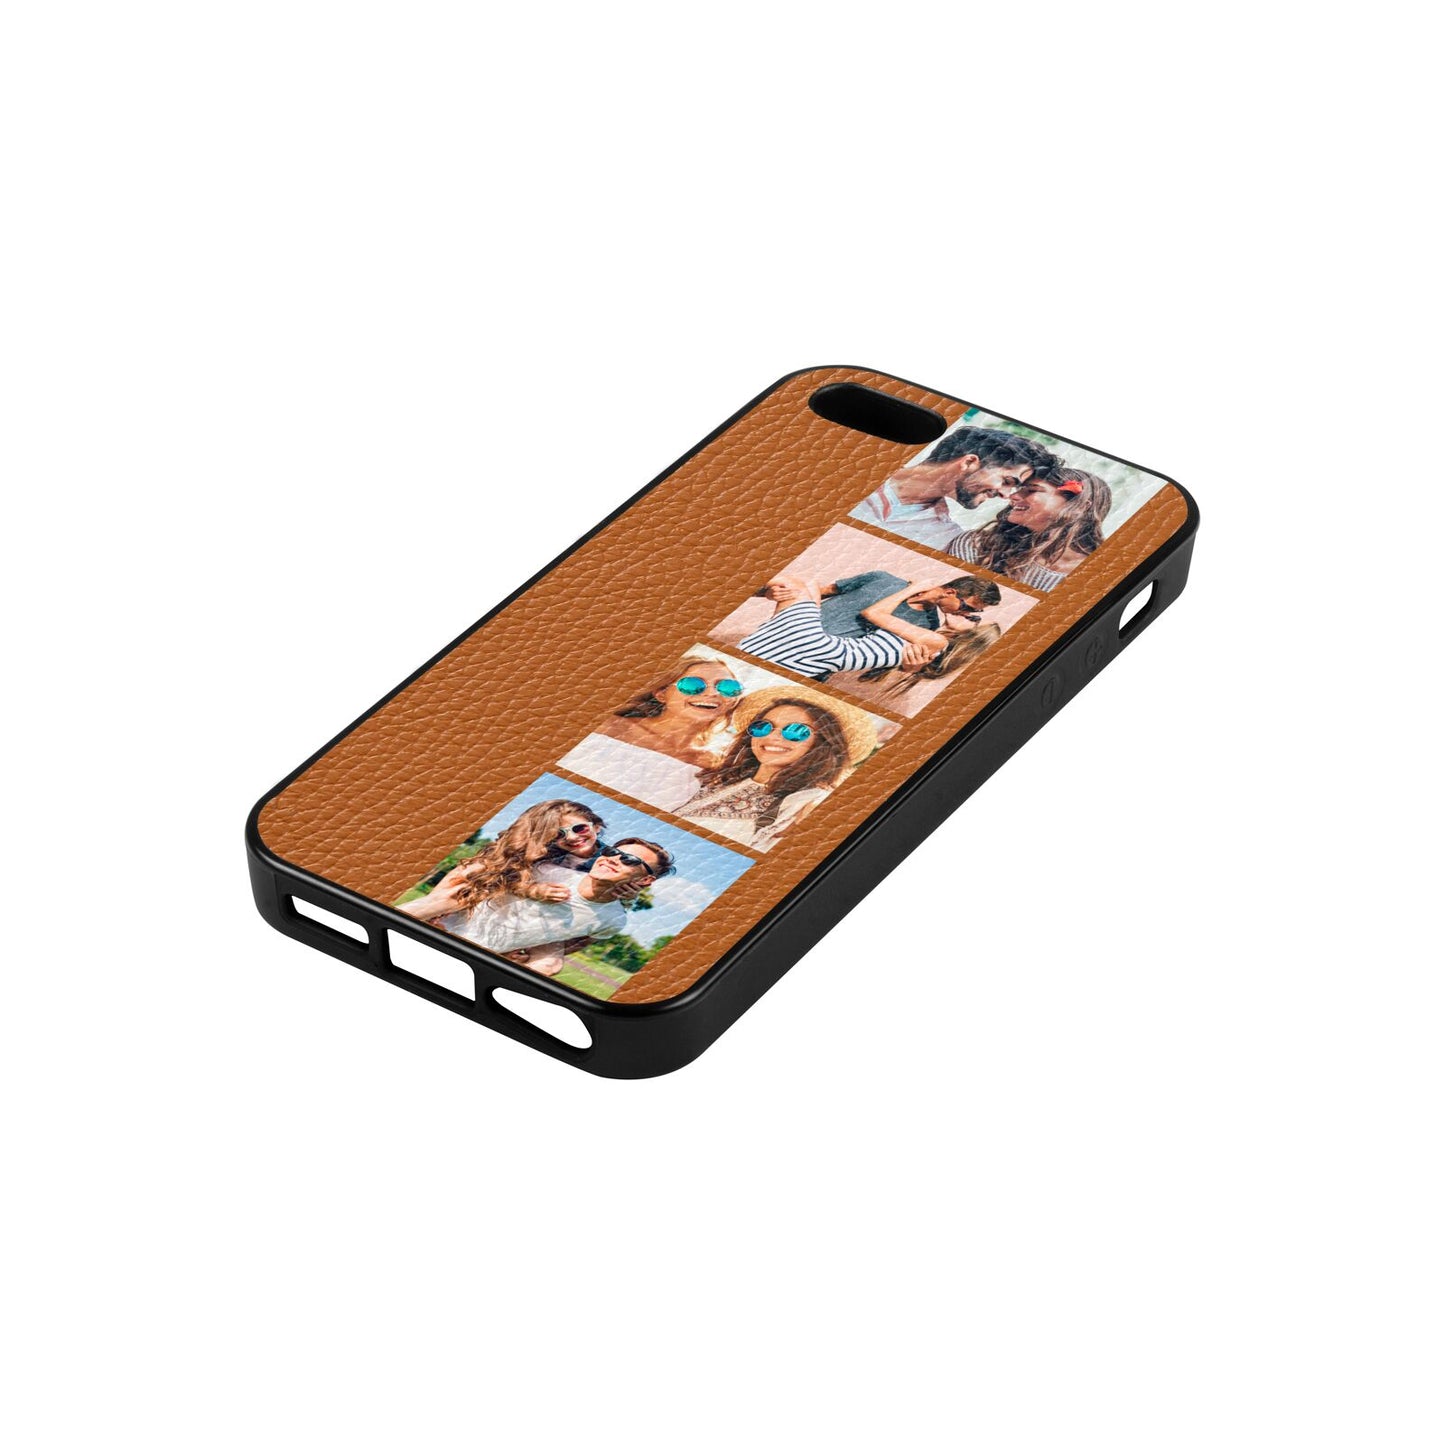 Photo Strip Montage Upload Tan Pebble Leather iPhone 5 Case Side Angle